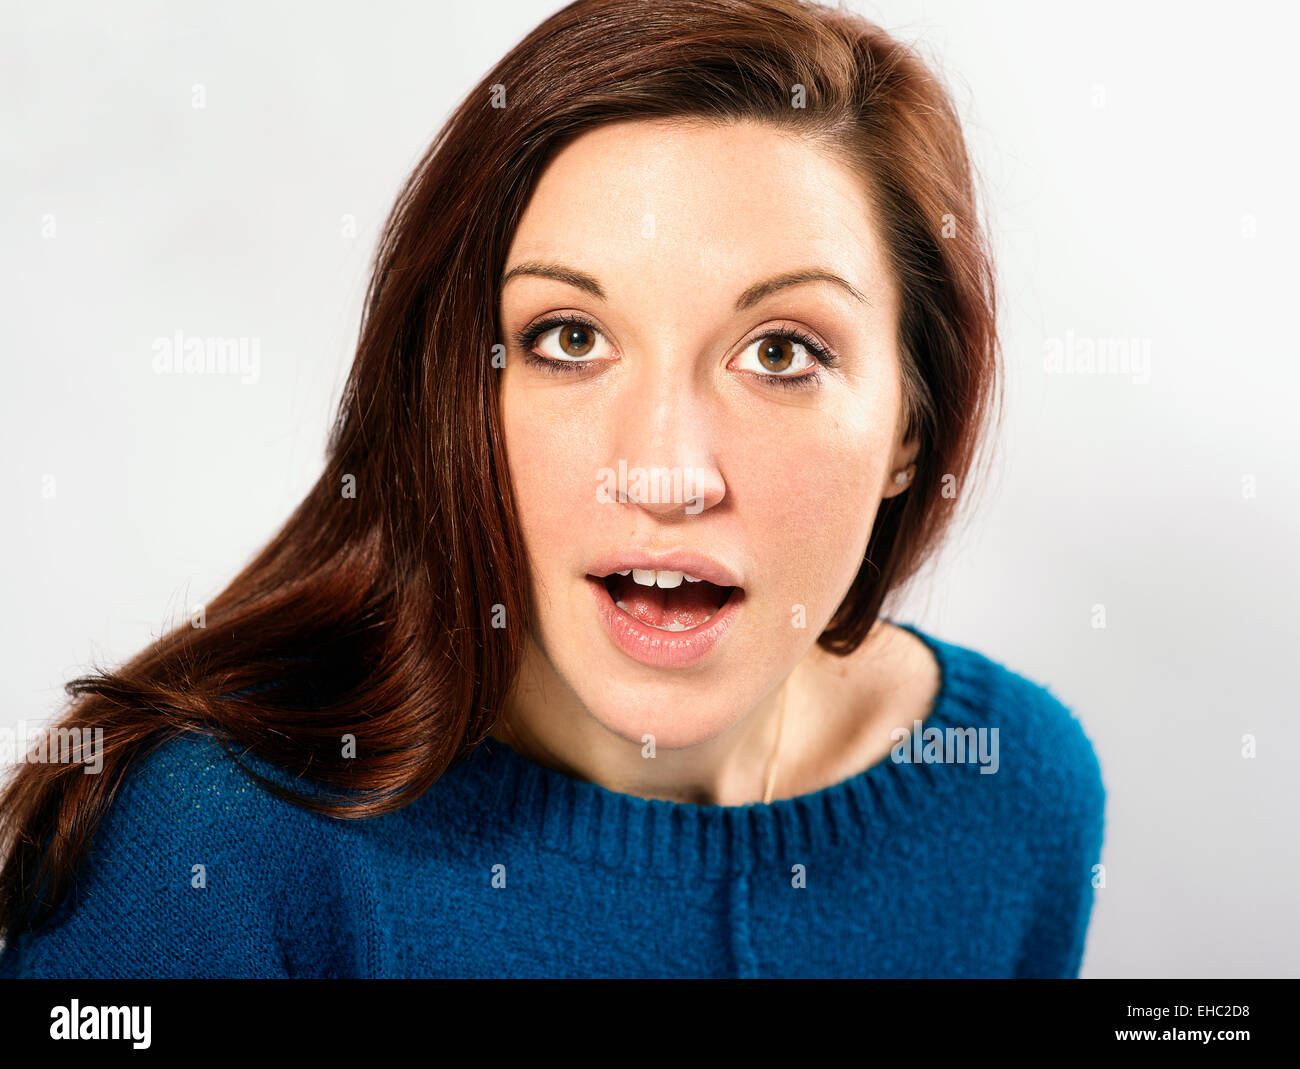 A portrait of a surprised woman. Stock Photo